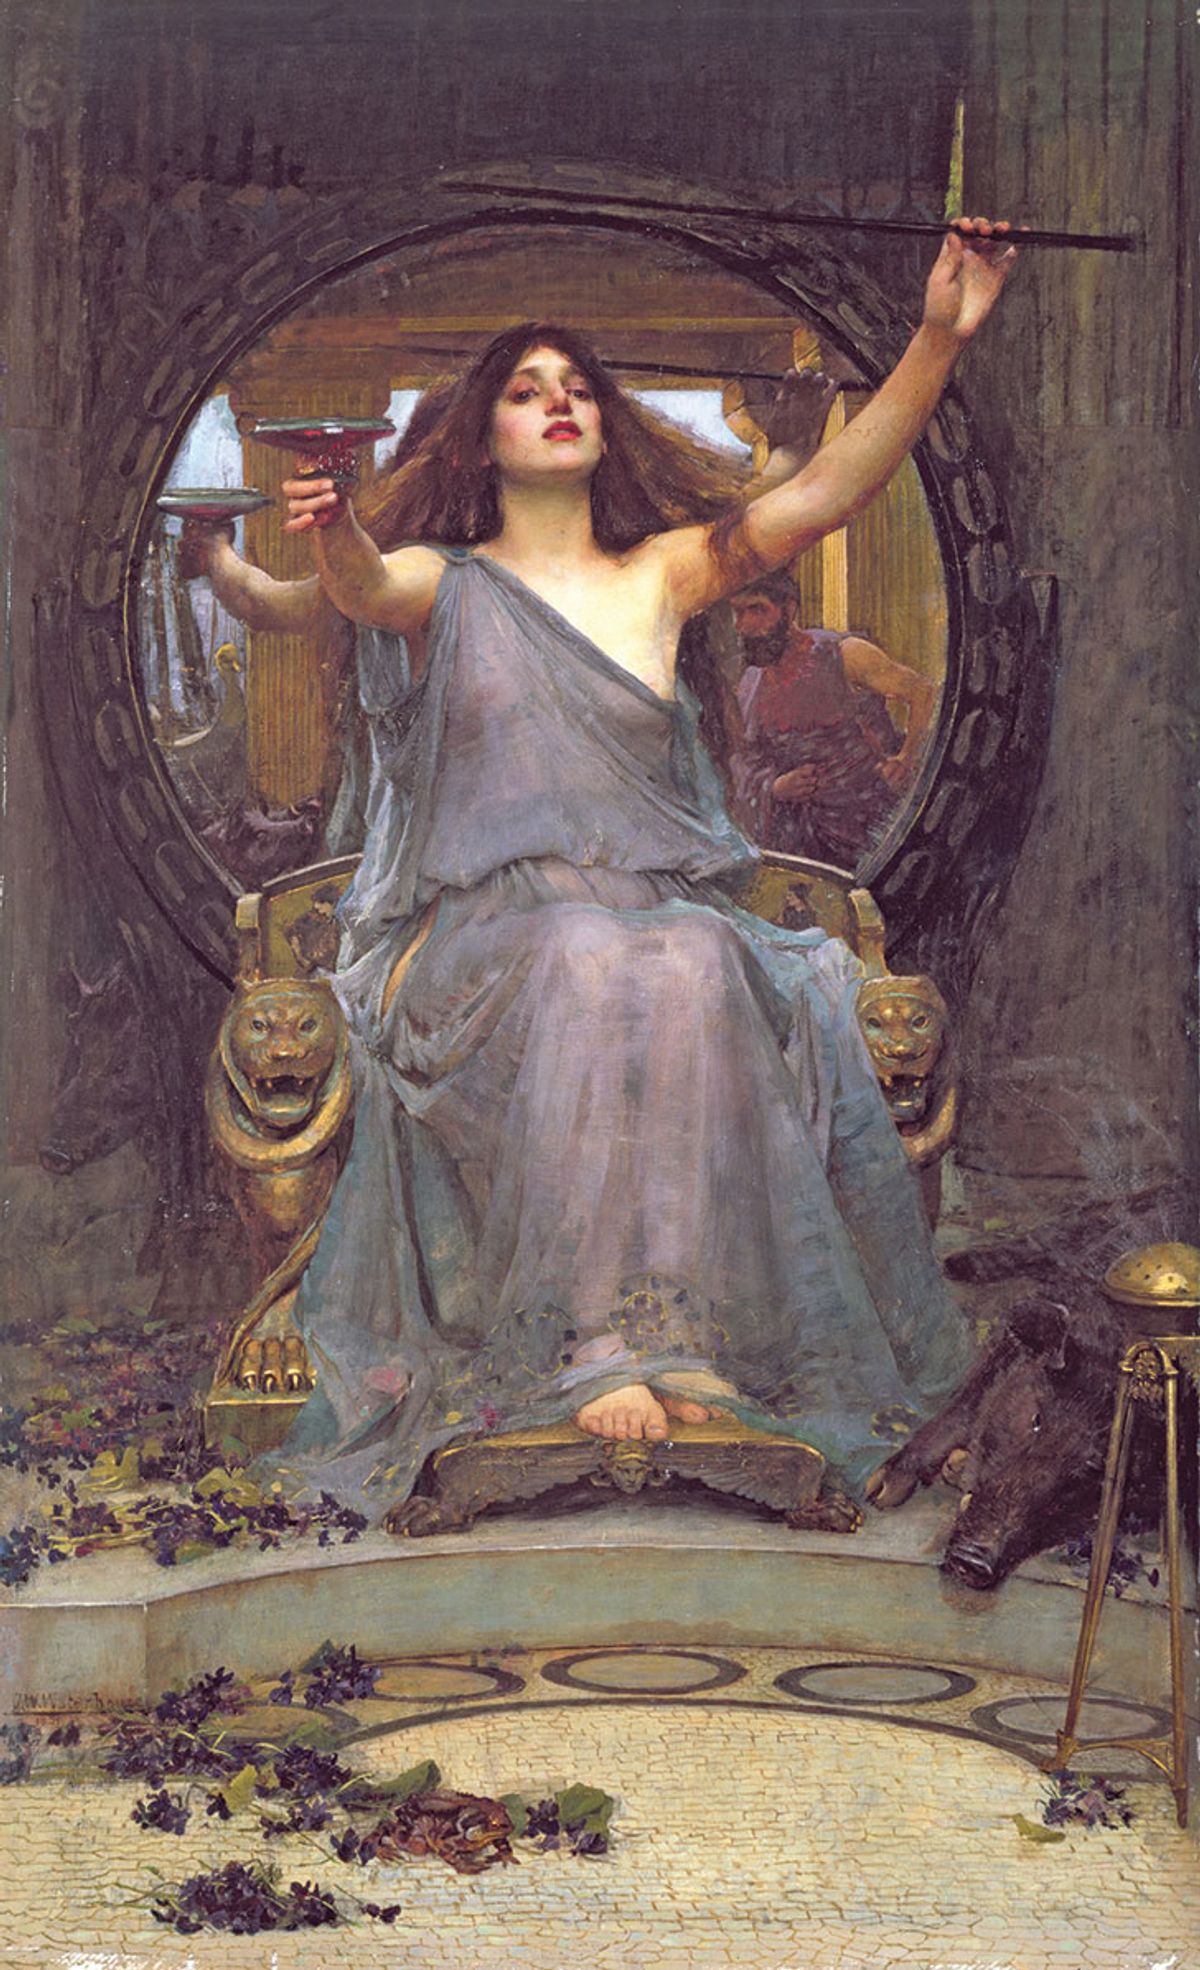 Waterhouse’s Circe offering the cup to Ulysses (1891) is typical of the eroticism in the work of some 19th-century male artists

© Gallery Oldham; bridgemanart.com


